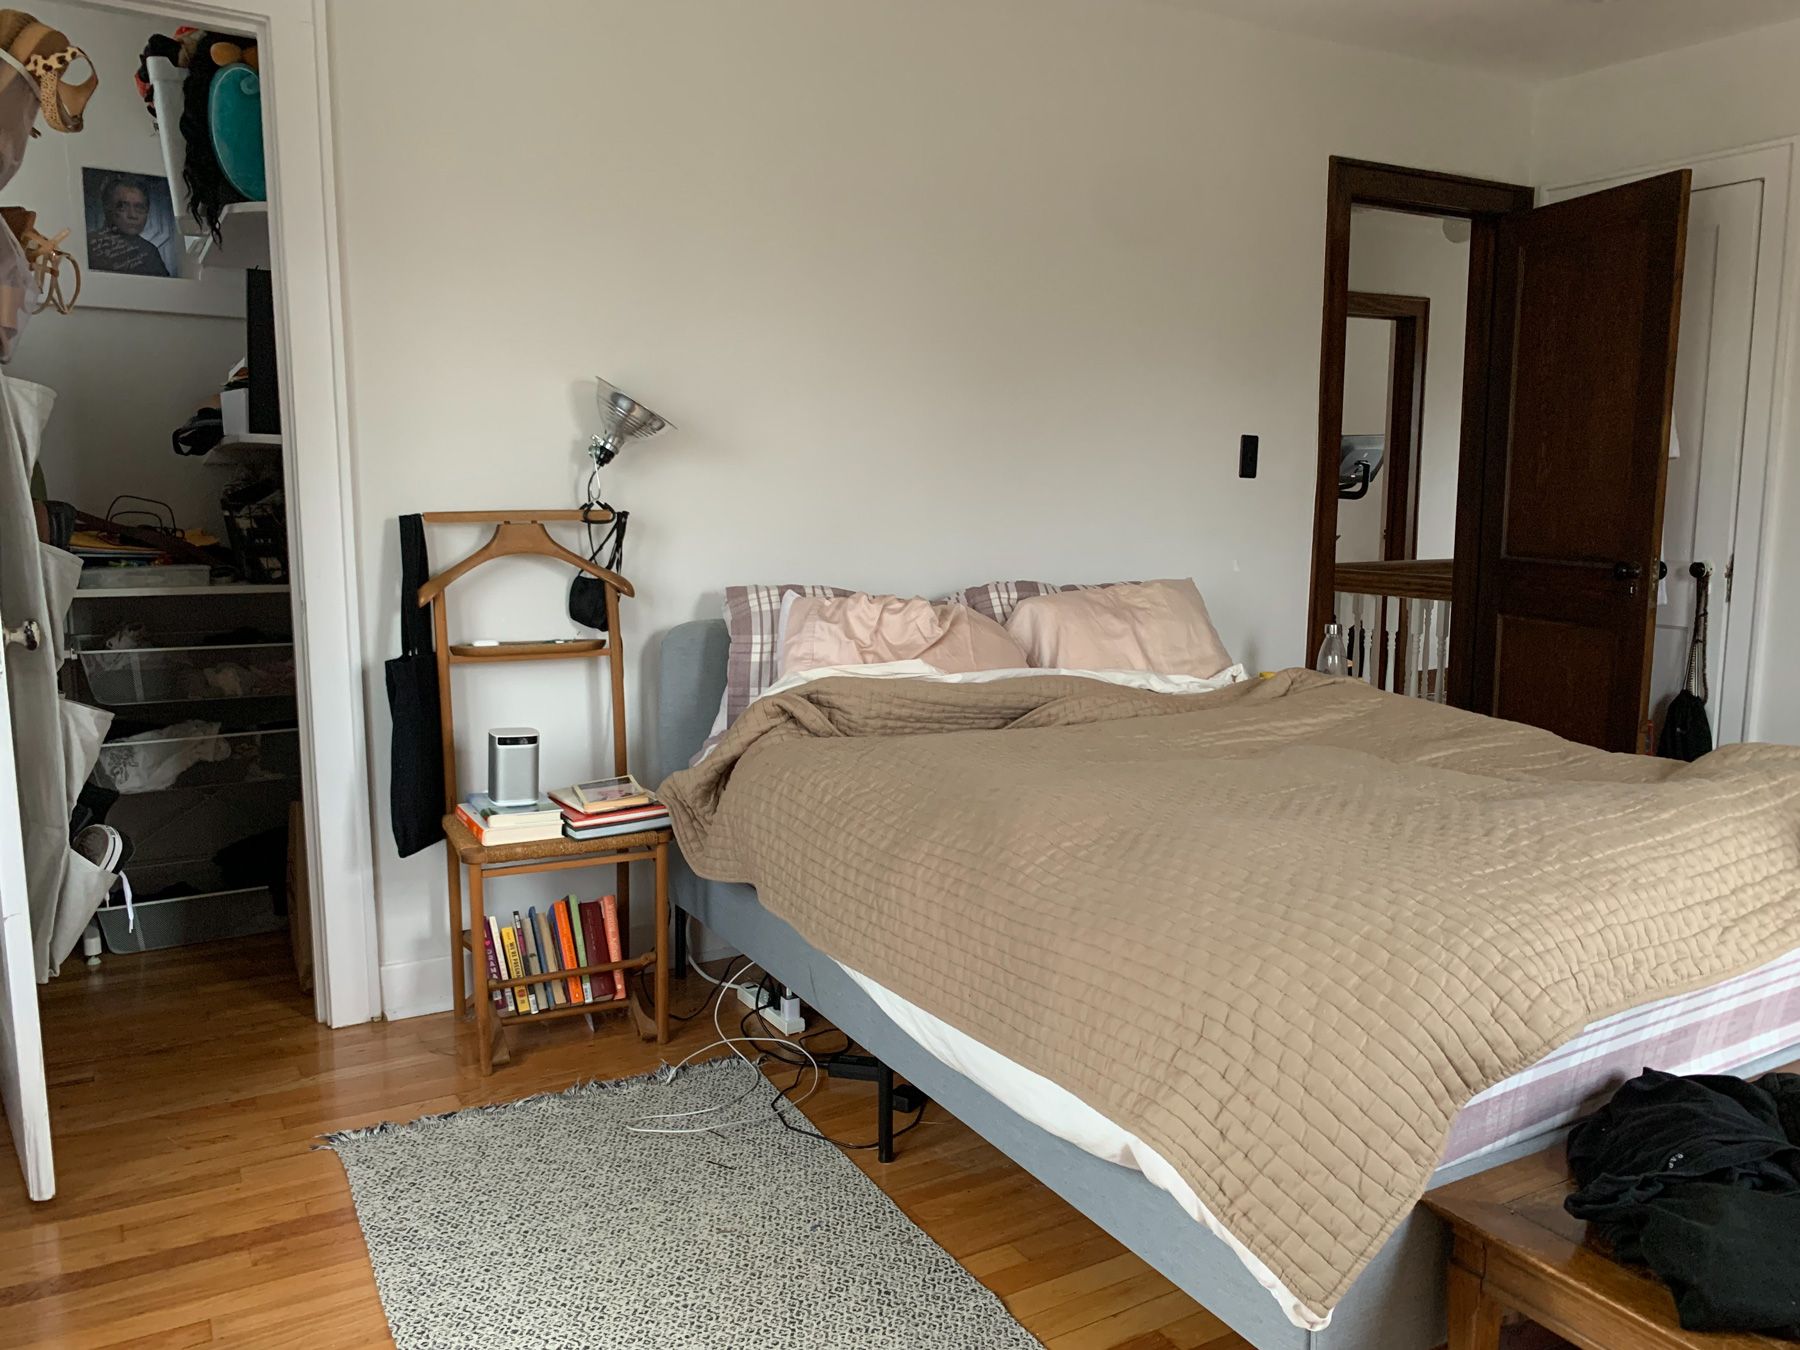 Similar view of bed from corner of room, except more centered at space around headboard. Wooden Italian butler chair with books on it, used as a side table. Clip lamp aimed at blank wall above headboard.